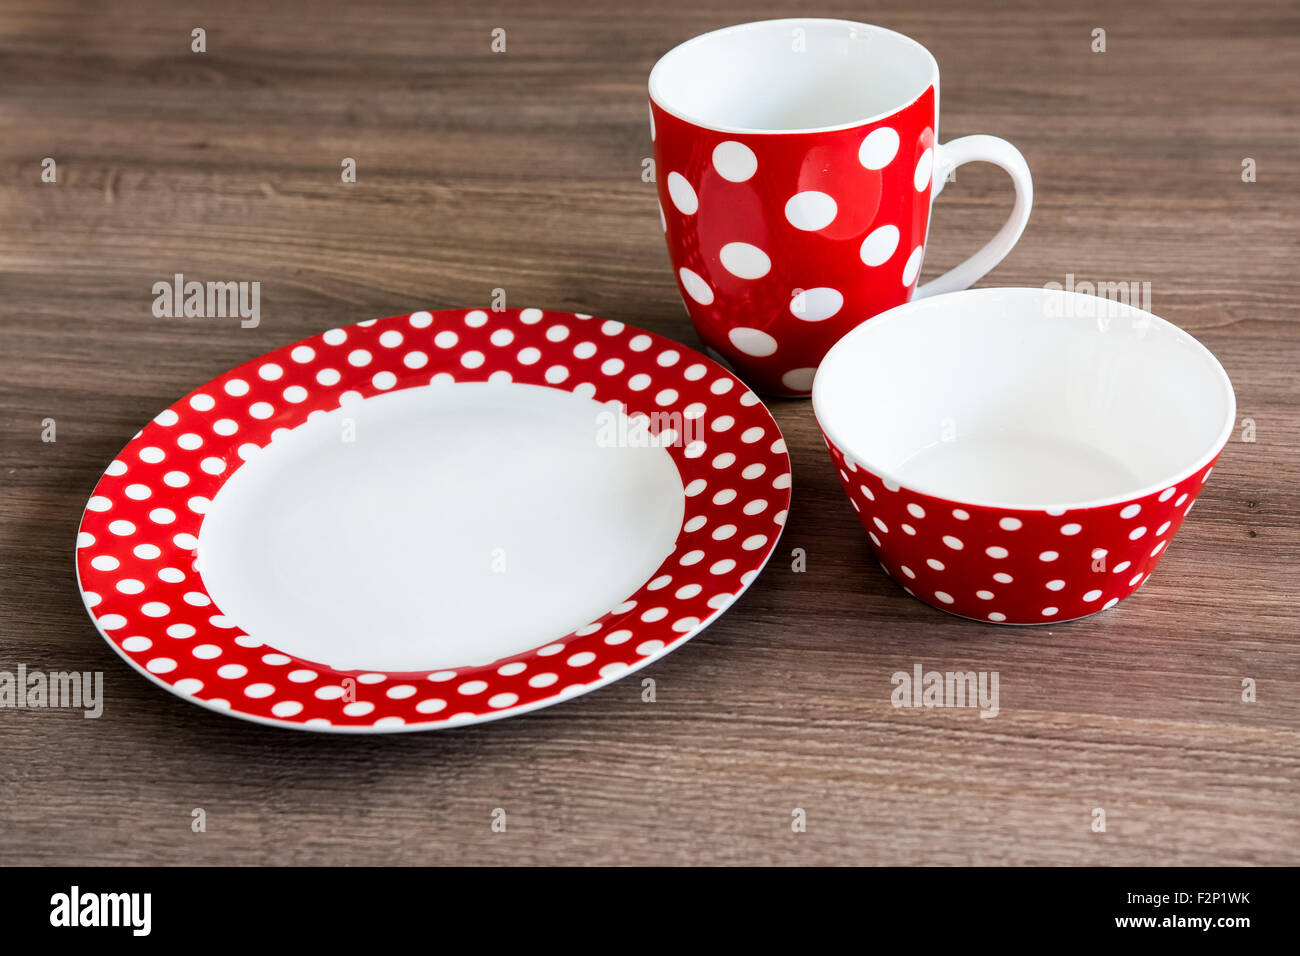 Red polka dotted plate, mug and bowl on brown table Stock Photo